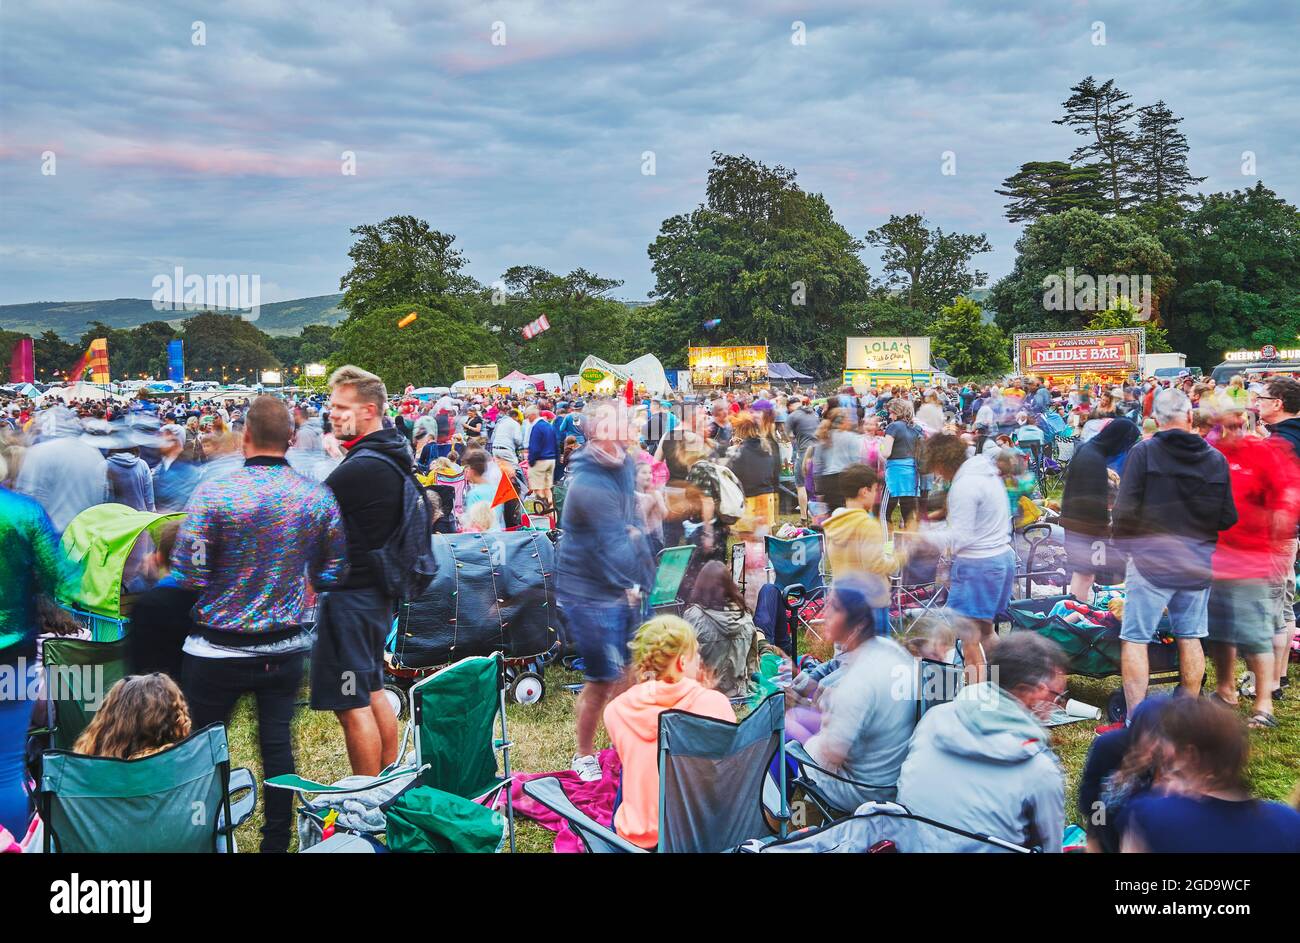 A dusk view of crowds of spectators in front of the main stage at Camp Bestival, a family-friendly annual music festival in Lulworth, Dorset, UK Stock Photo